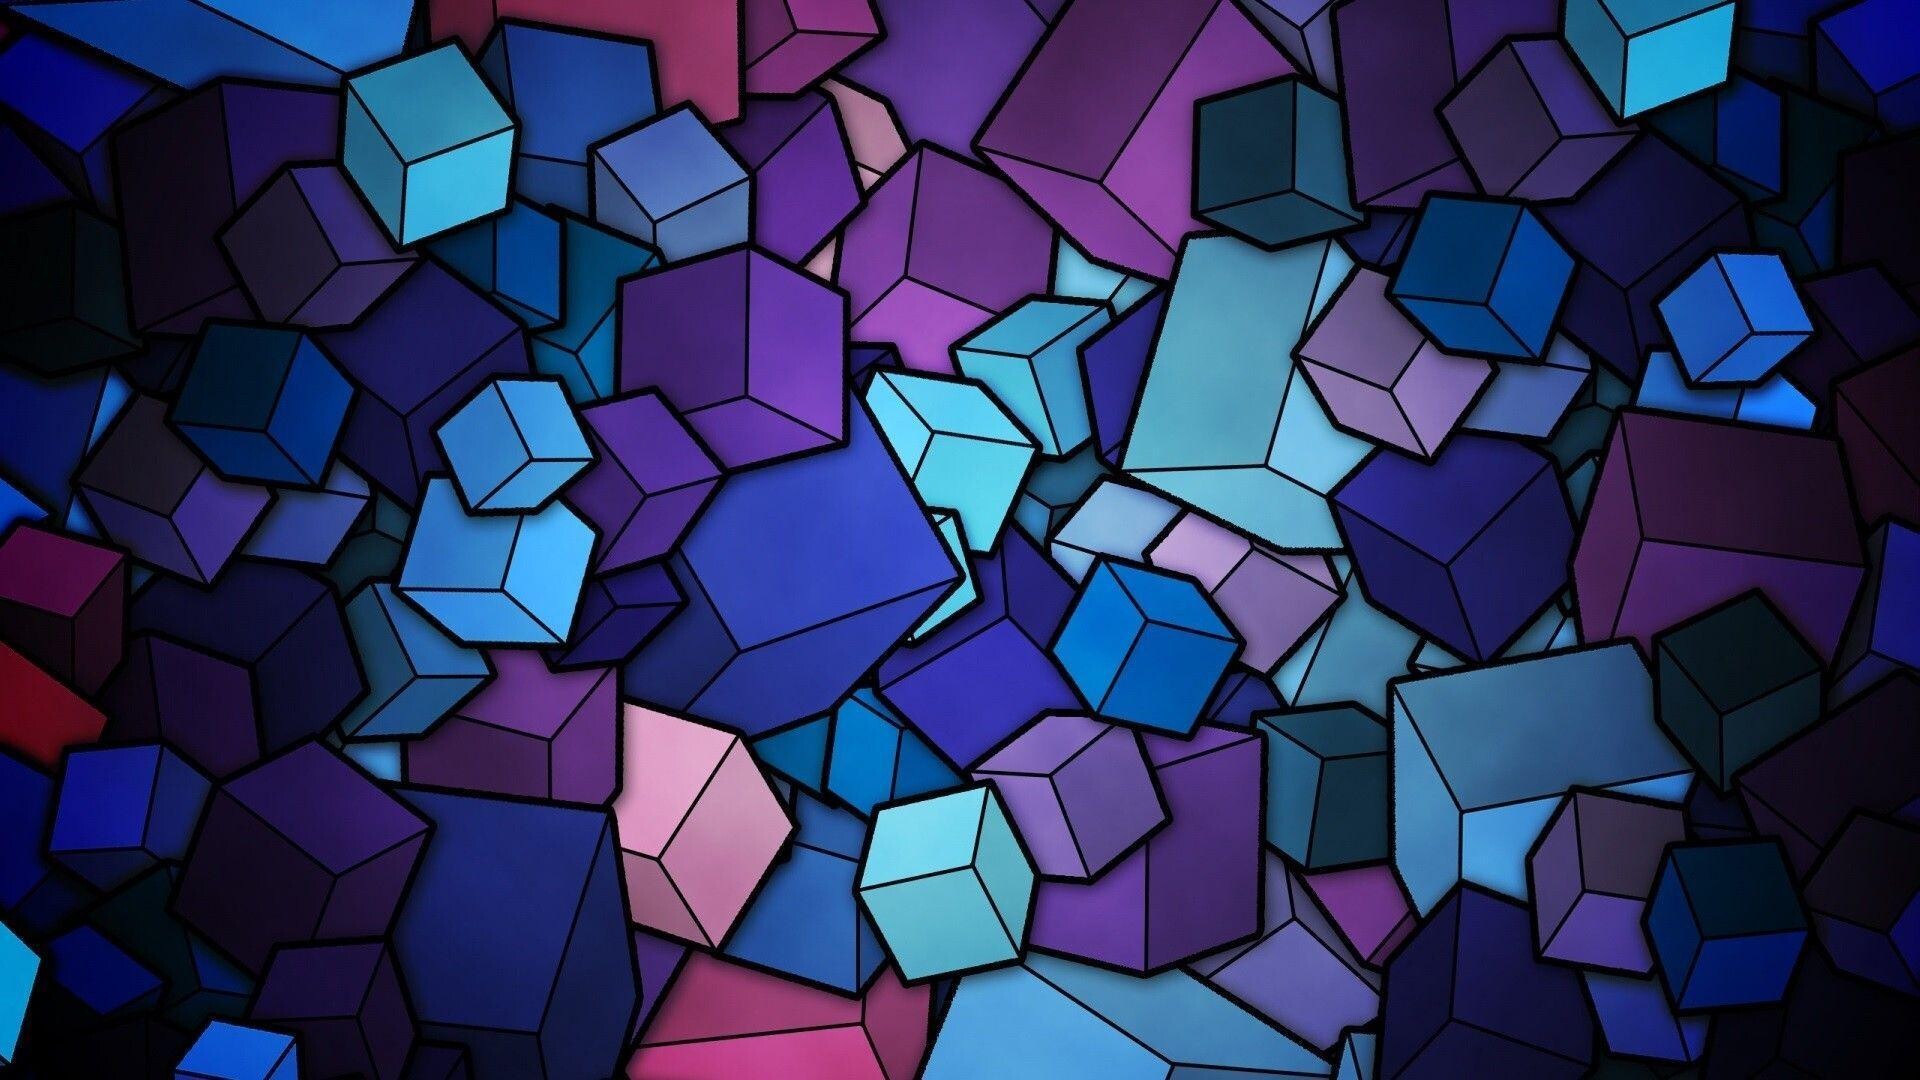 Geometric Abstract: Digital art, Cubes, Parallel lines, Right angles, Squares. 1920x1080 Full HD Wallpaper.